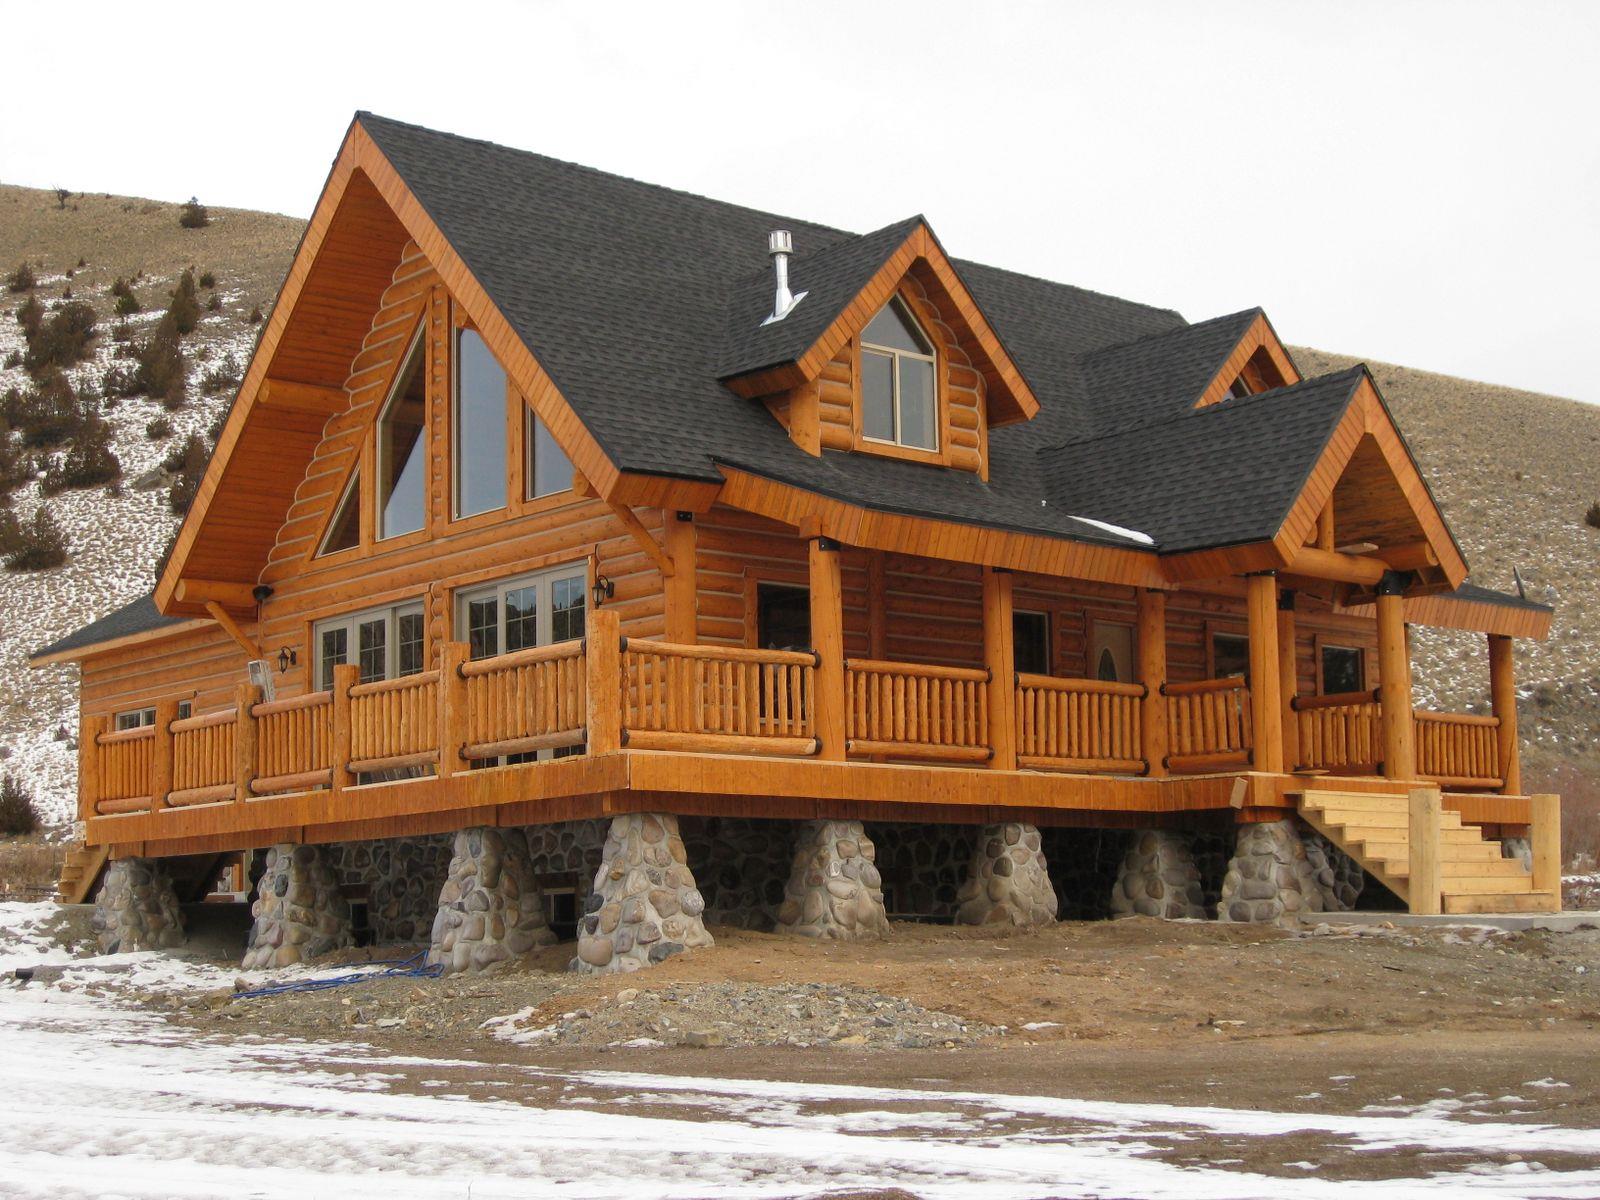 Pre built advantages, fast assembly with panelized kit log homes